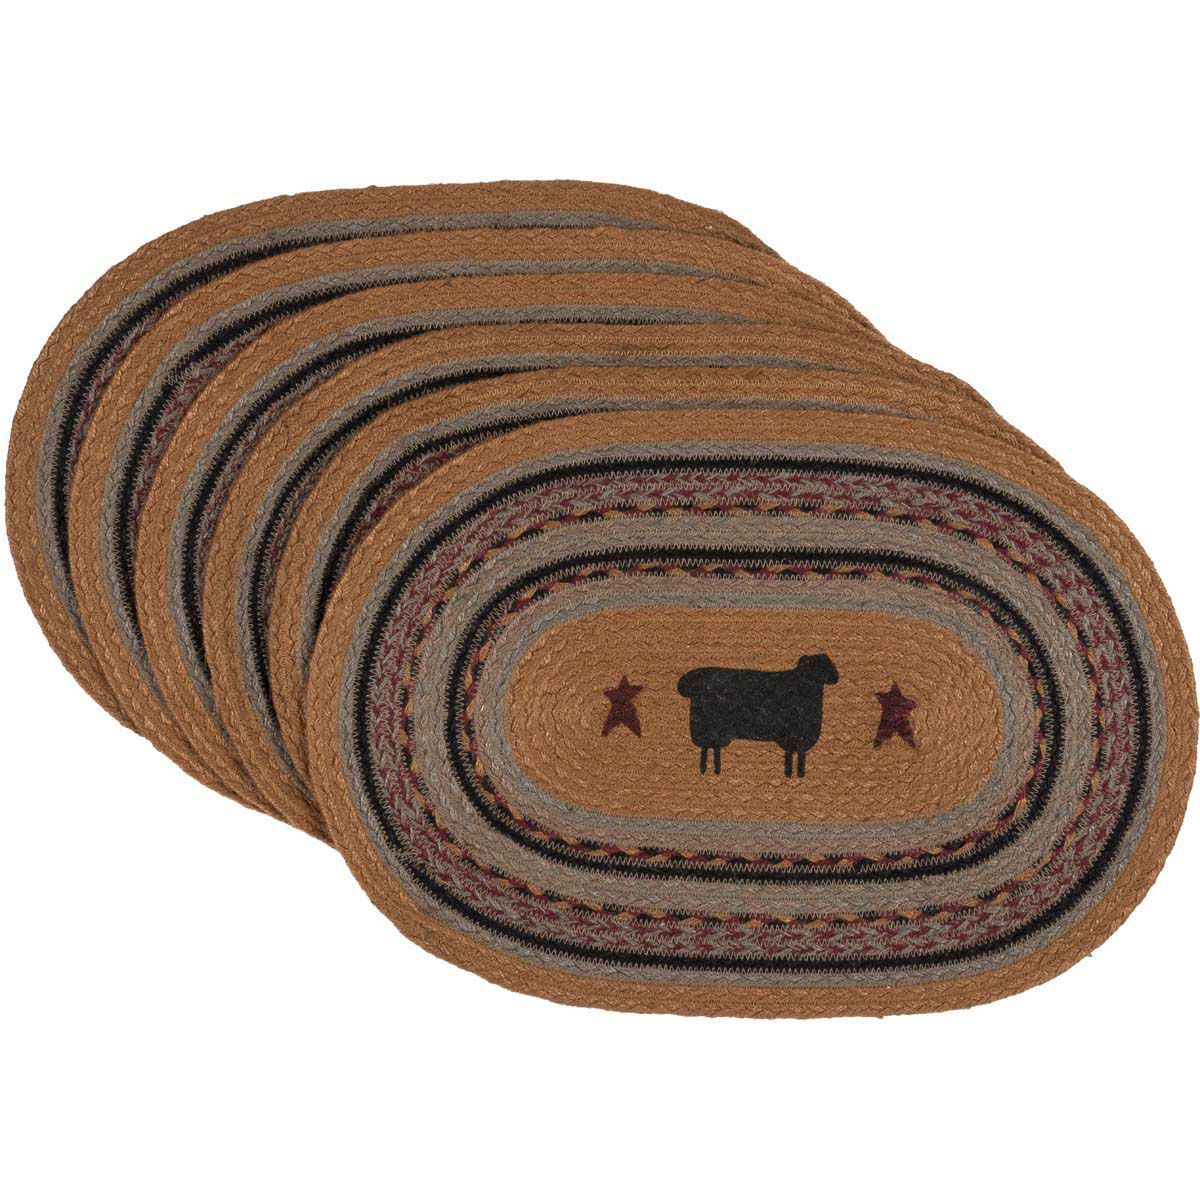 Heritage Farms Sheep Braided Placemats Set Of The Weed Patch